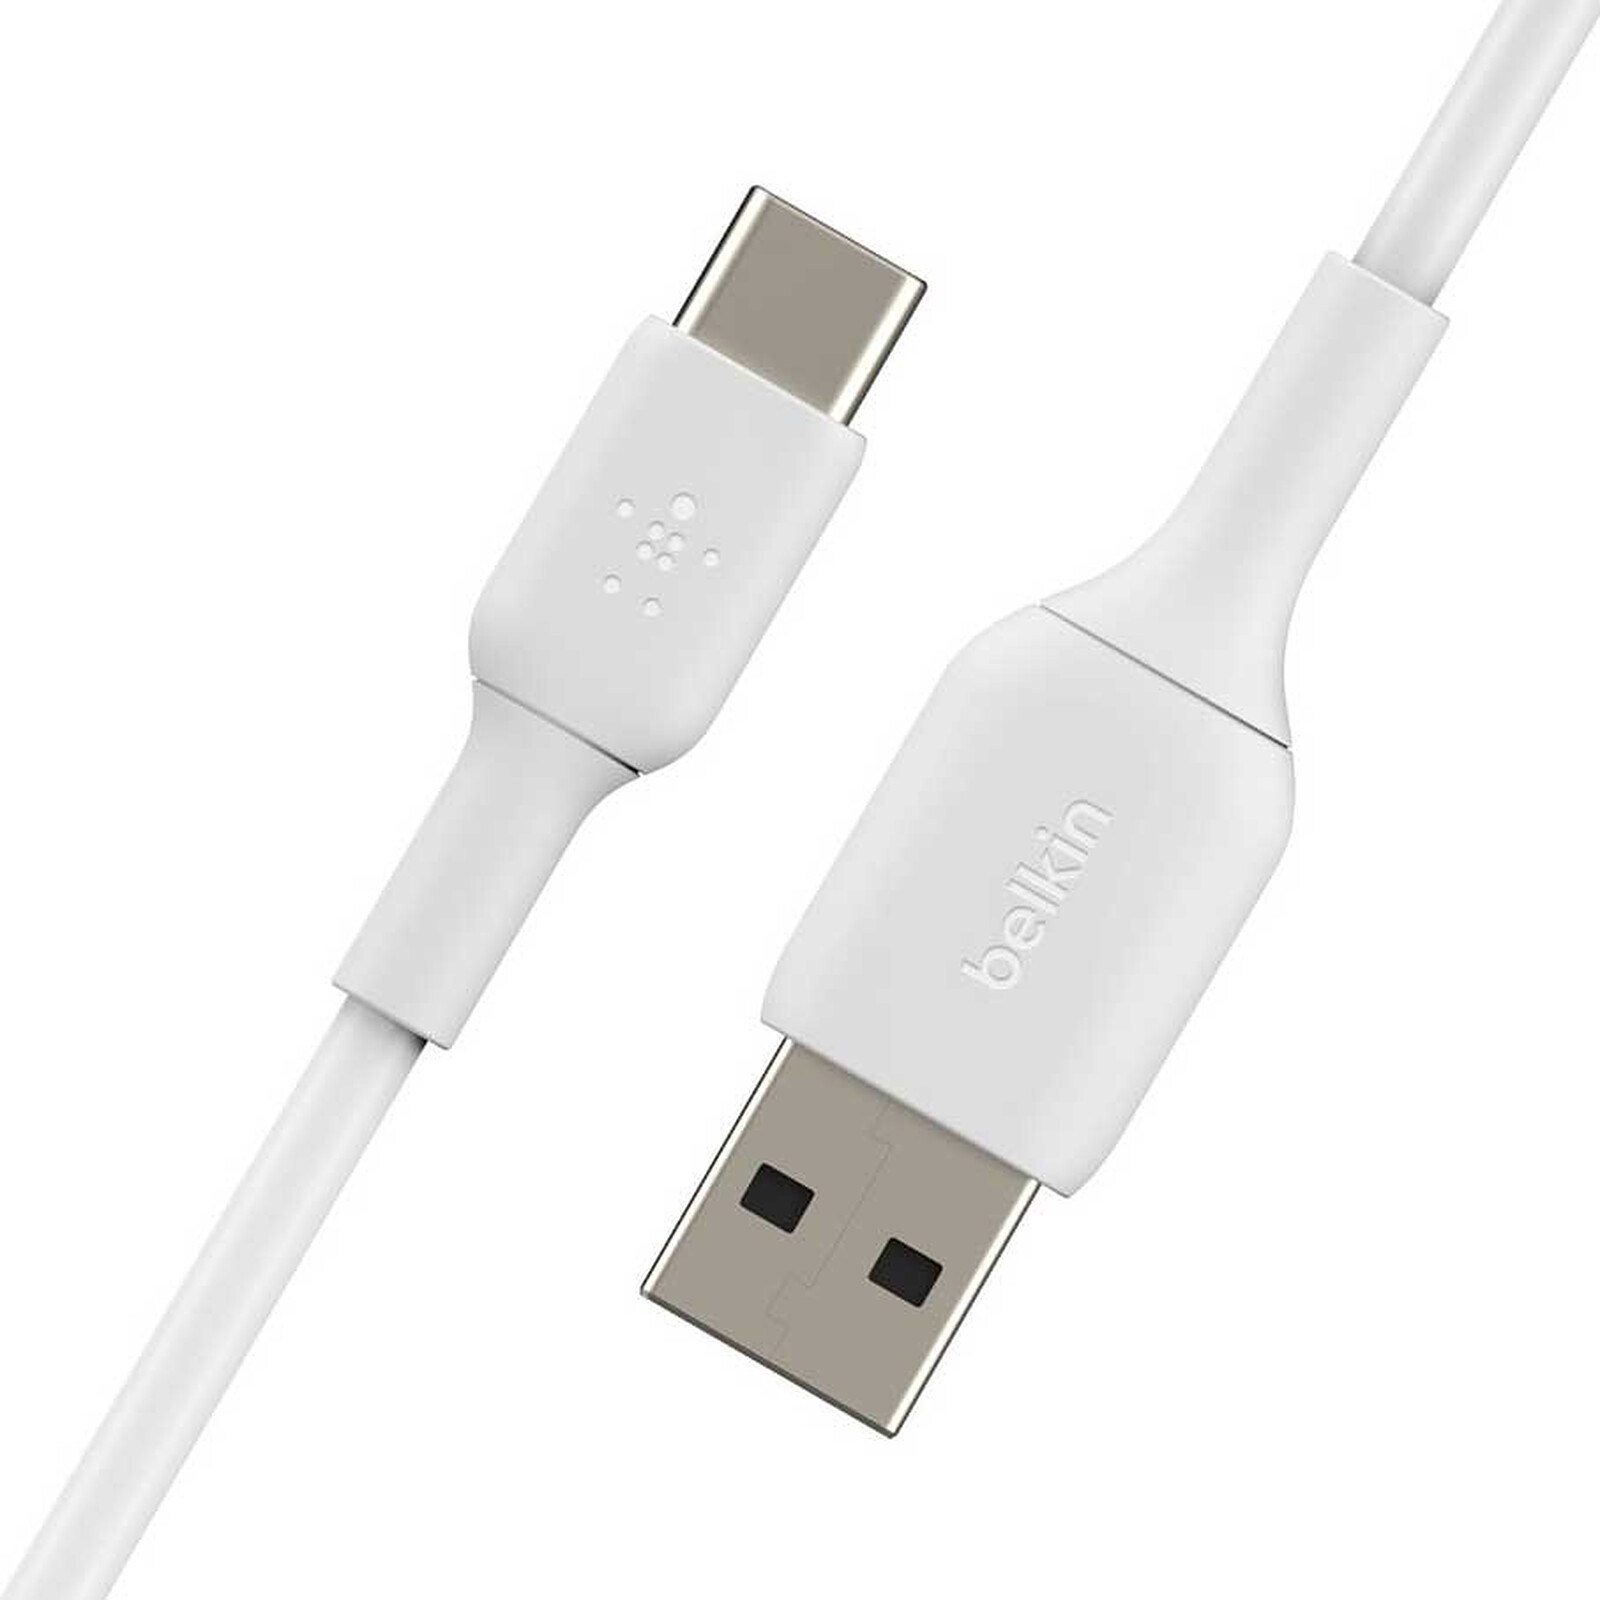 2Pack 1M iPhone Charger Cable [Apple MFi Certified] Lightning to